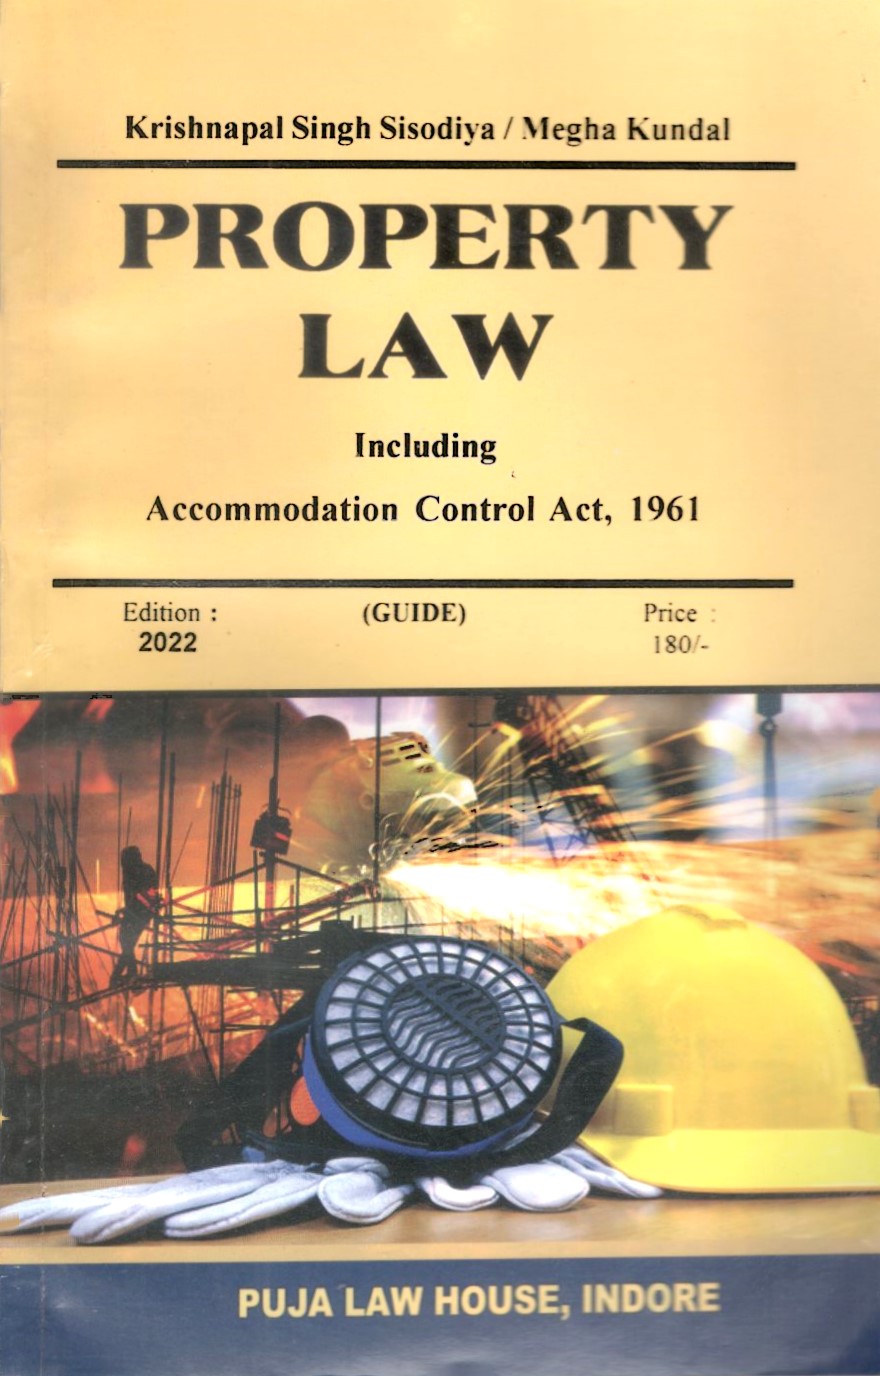 Property Law Including Accommodation Control Act, 1961 (Guide)